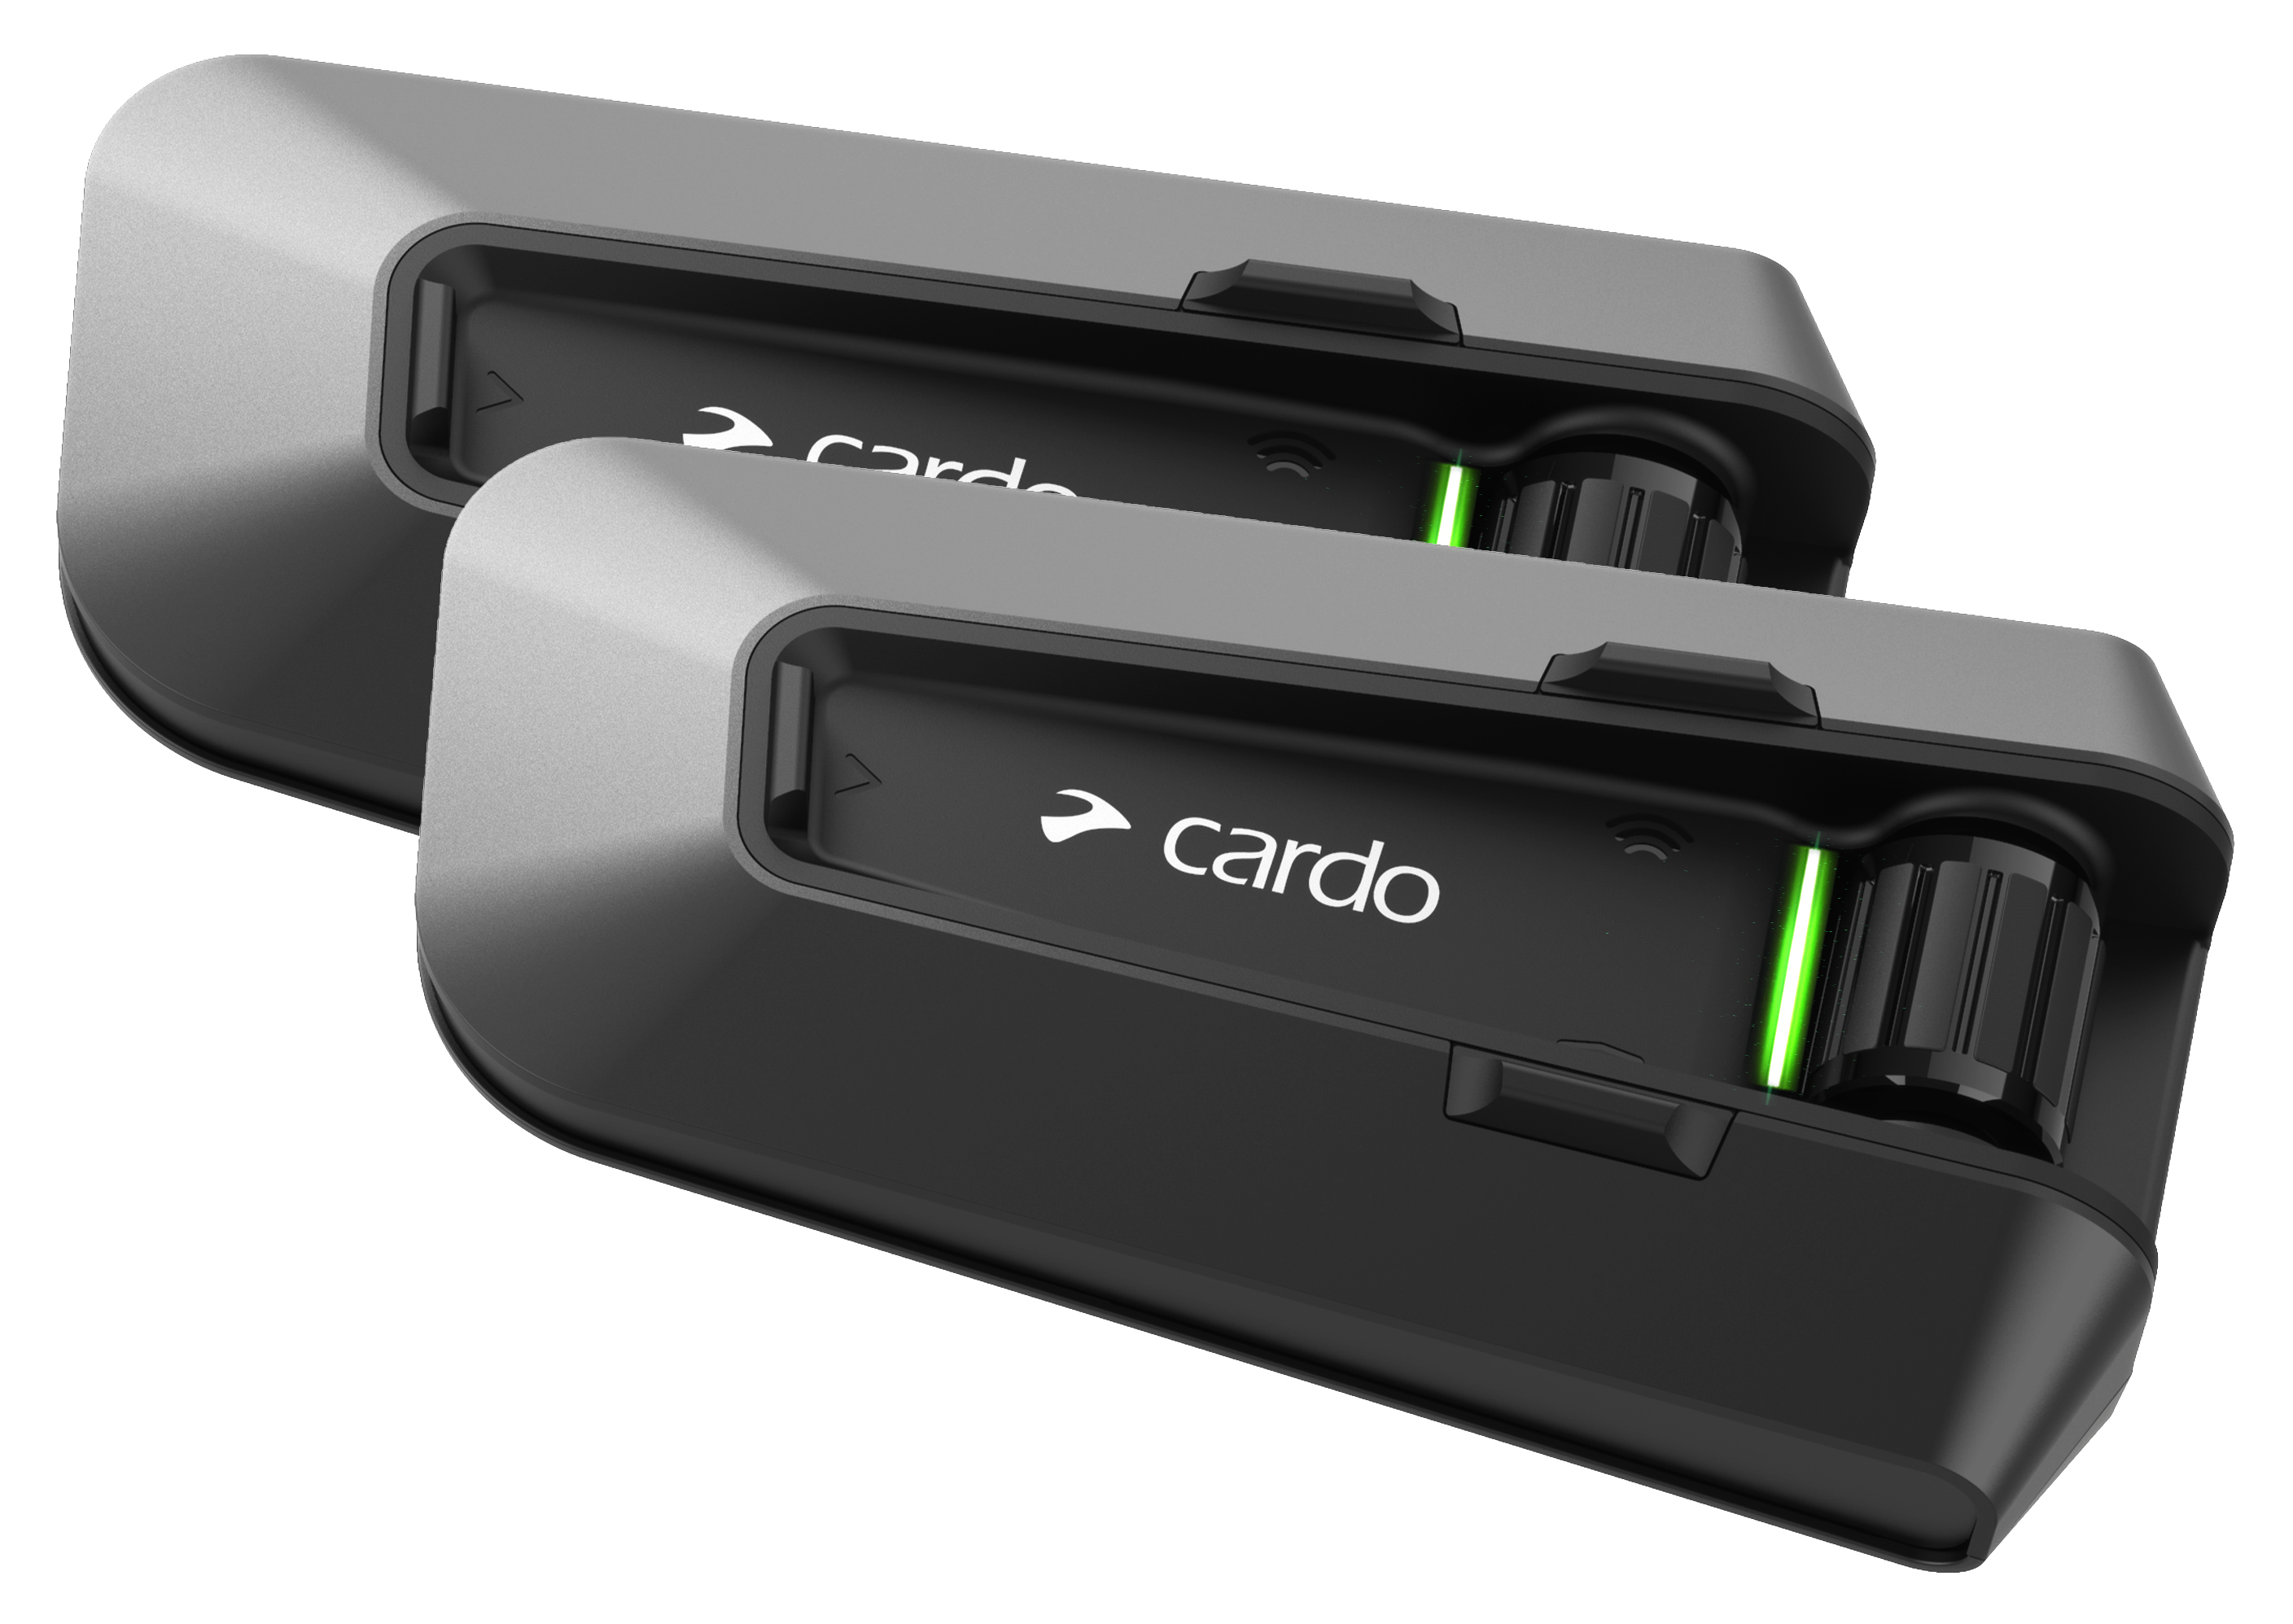 CARDO Packtalk Edge Duo - Intercom systems for motorcycles